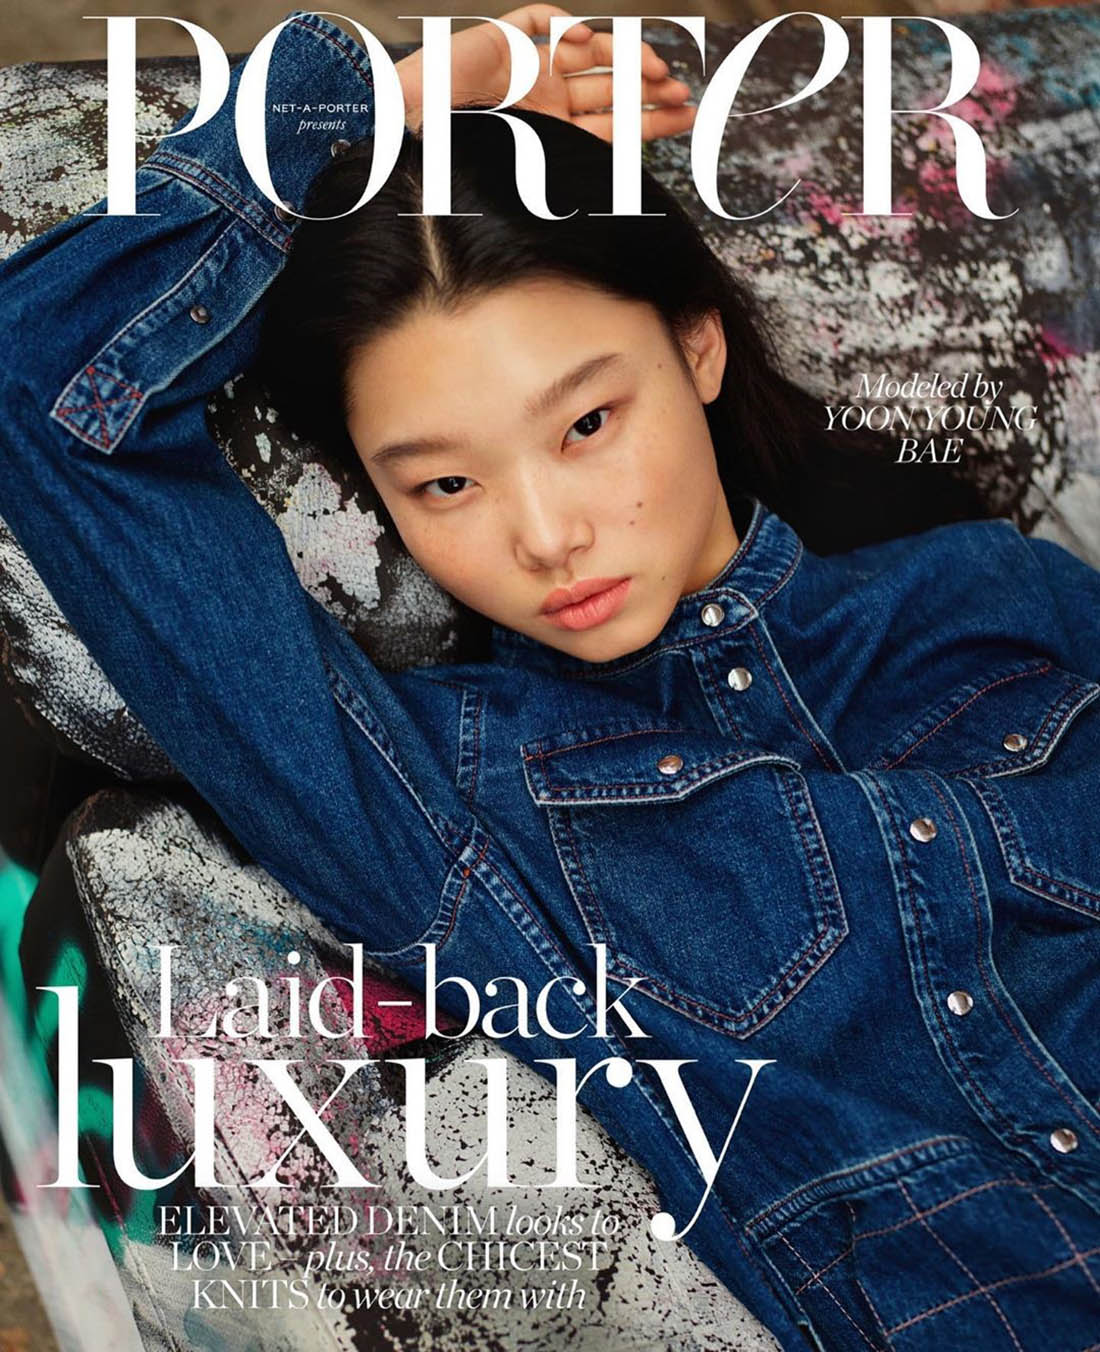 Yoon Young Bae covers Porter Magazine August 24th, 2020 by Hyea W. Kang